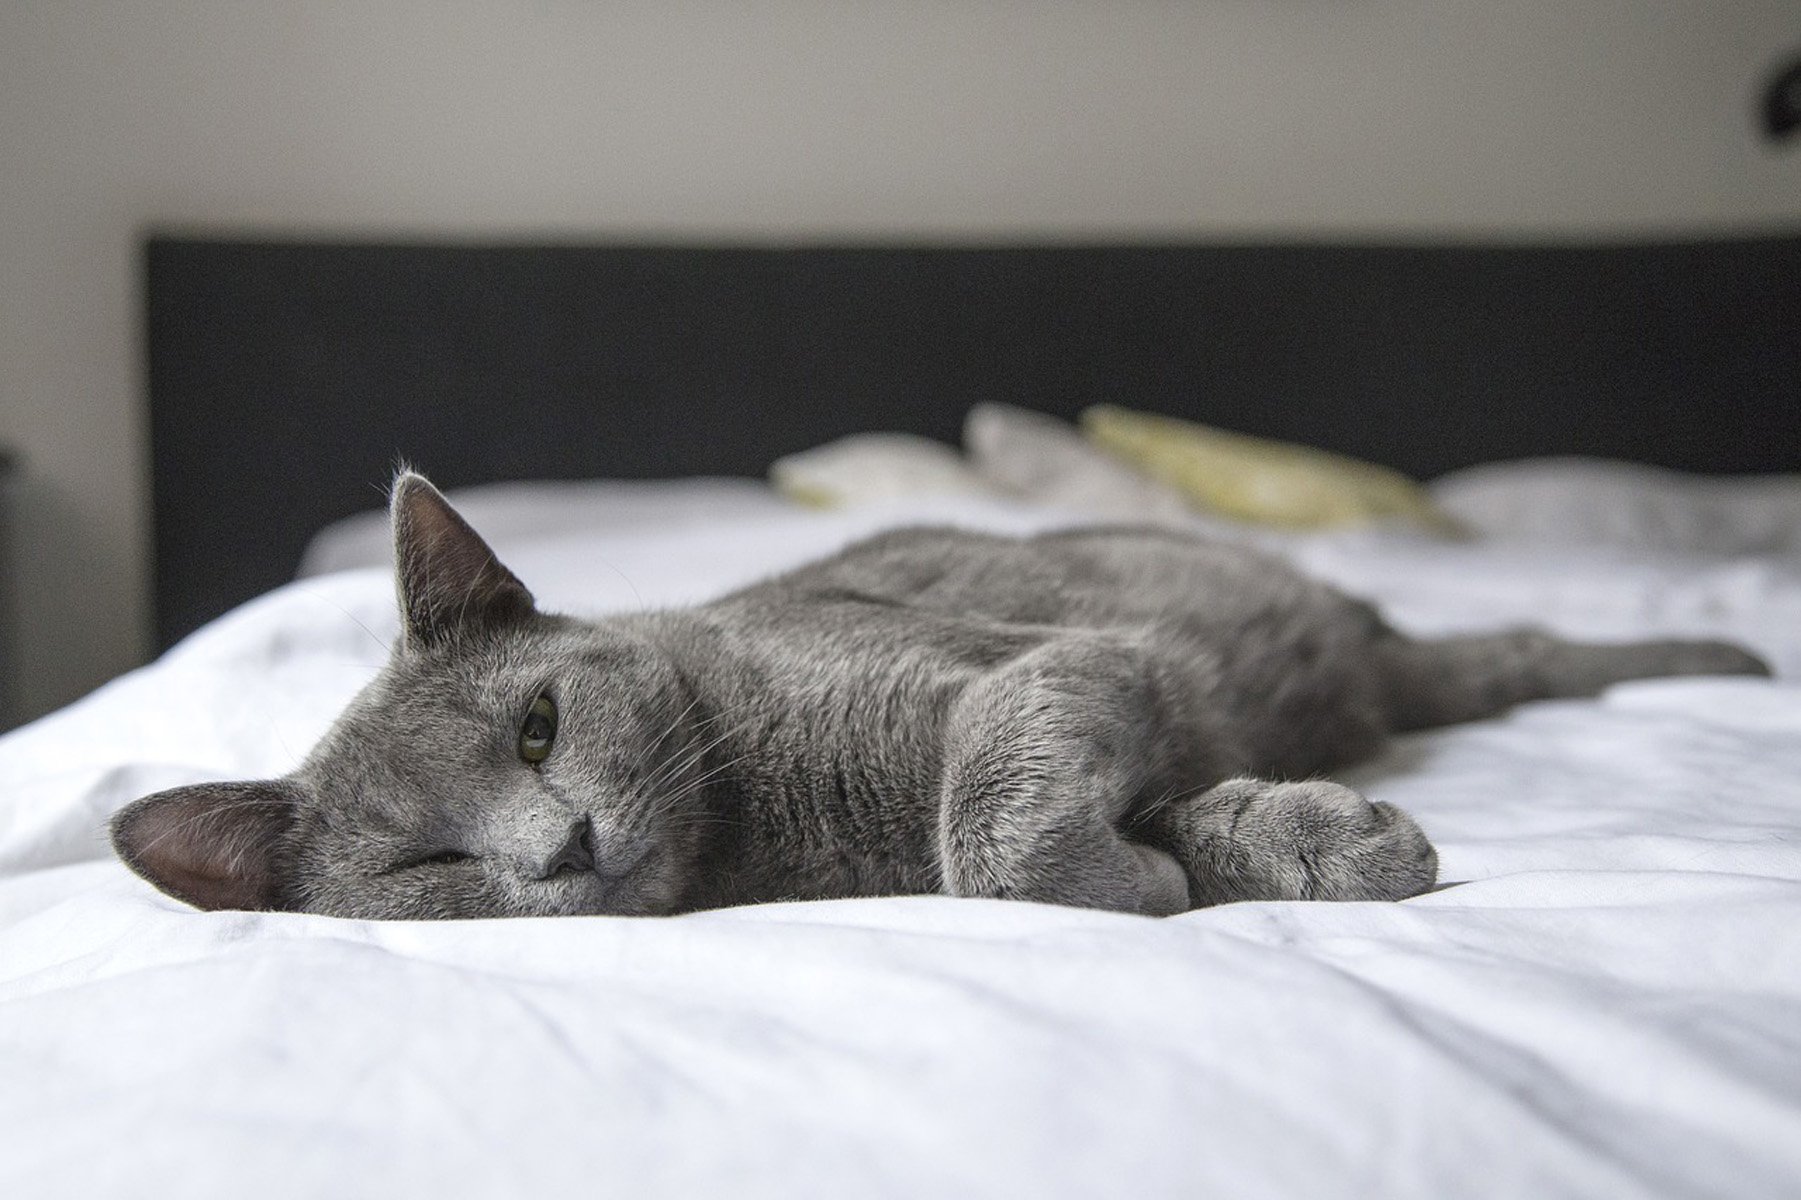 088_cat_laying_on_bed.jpg